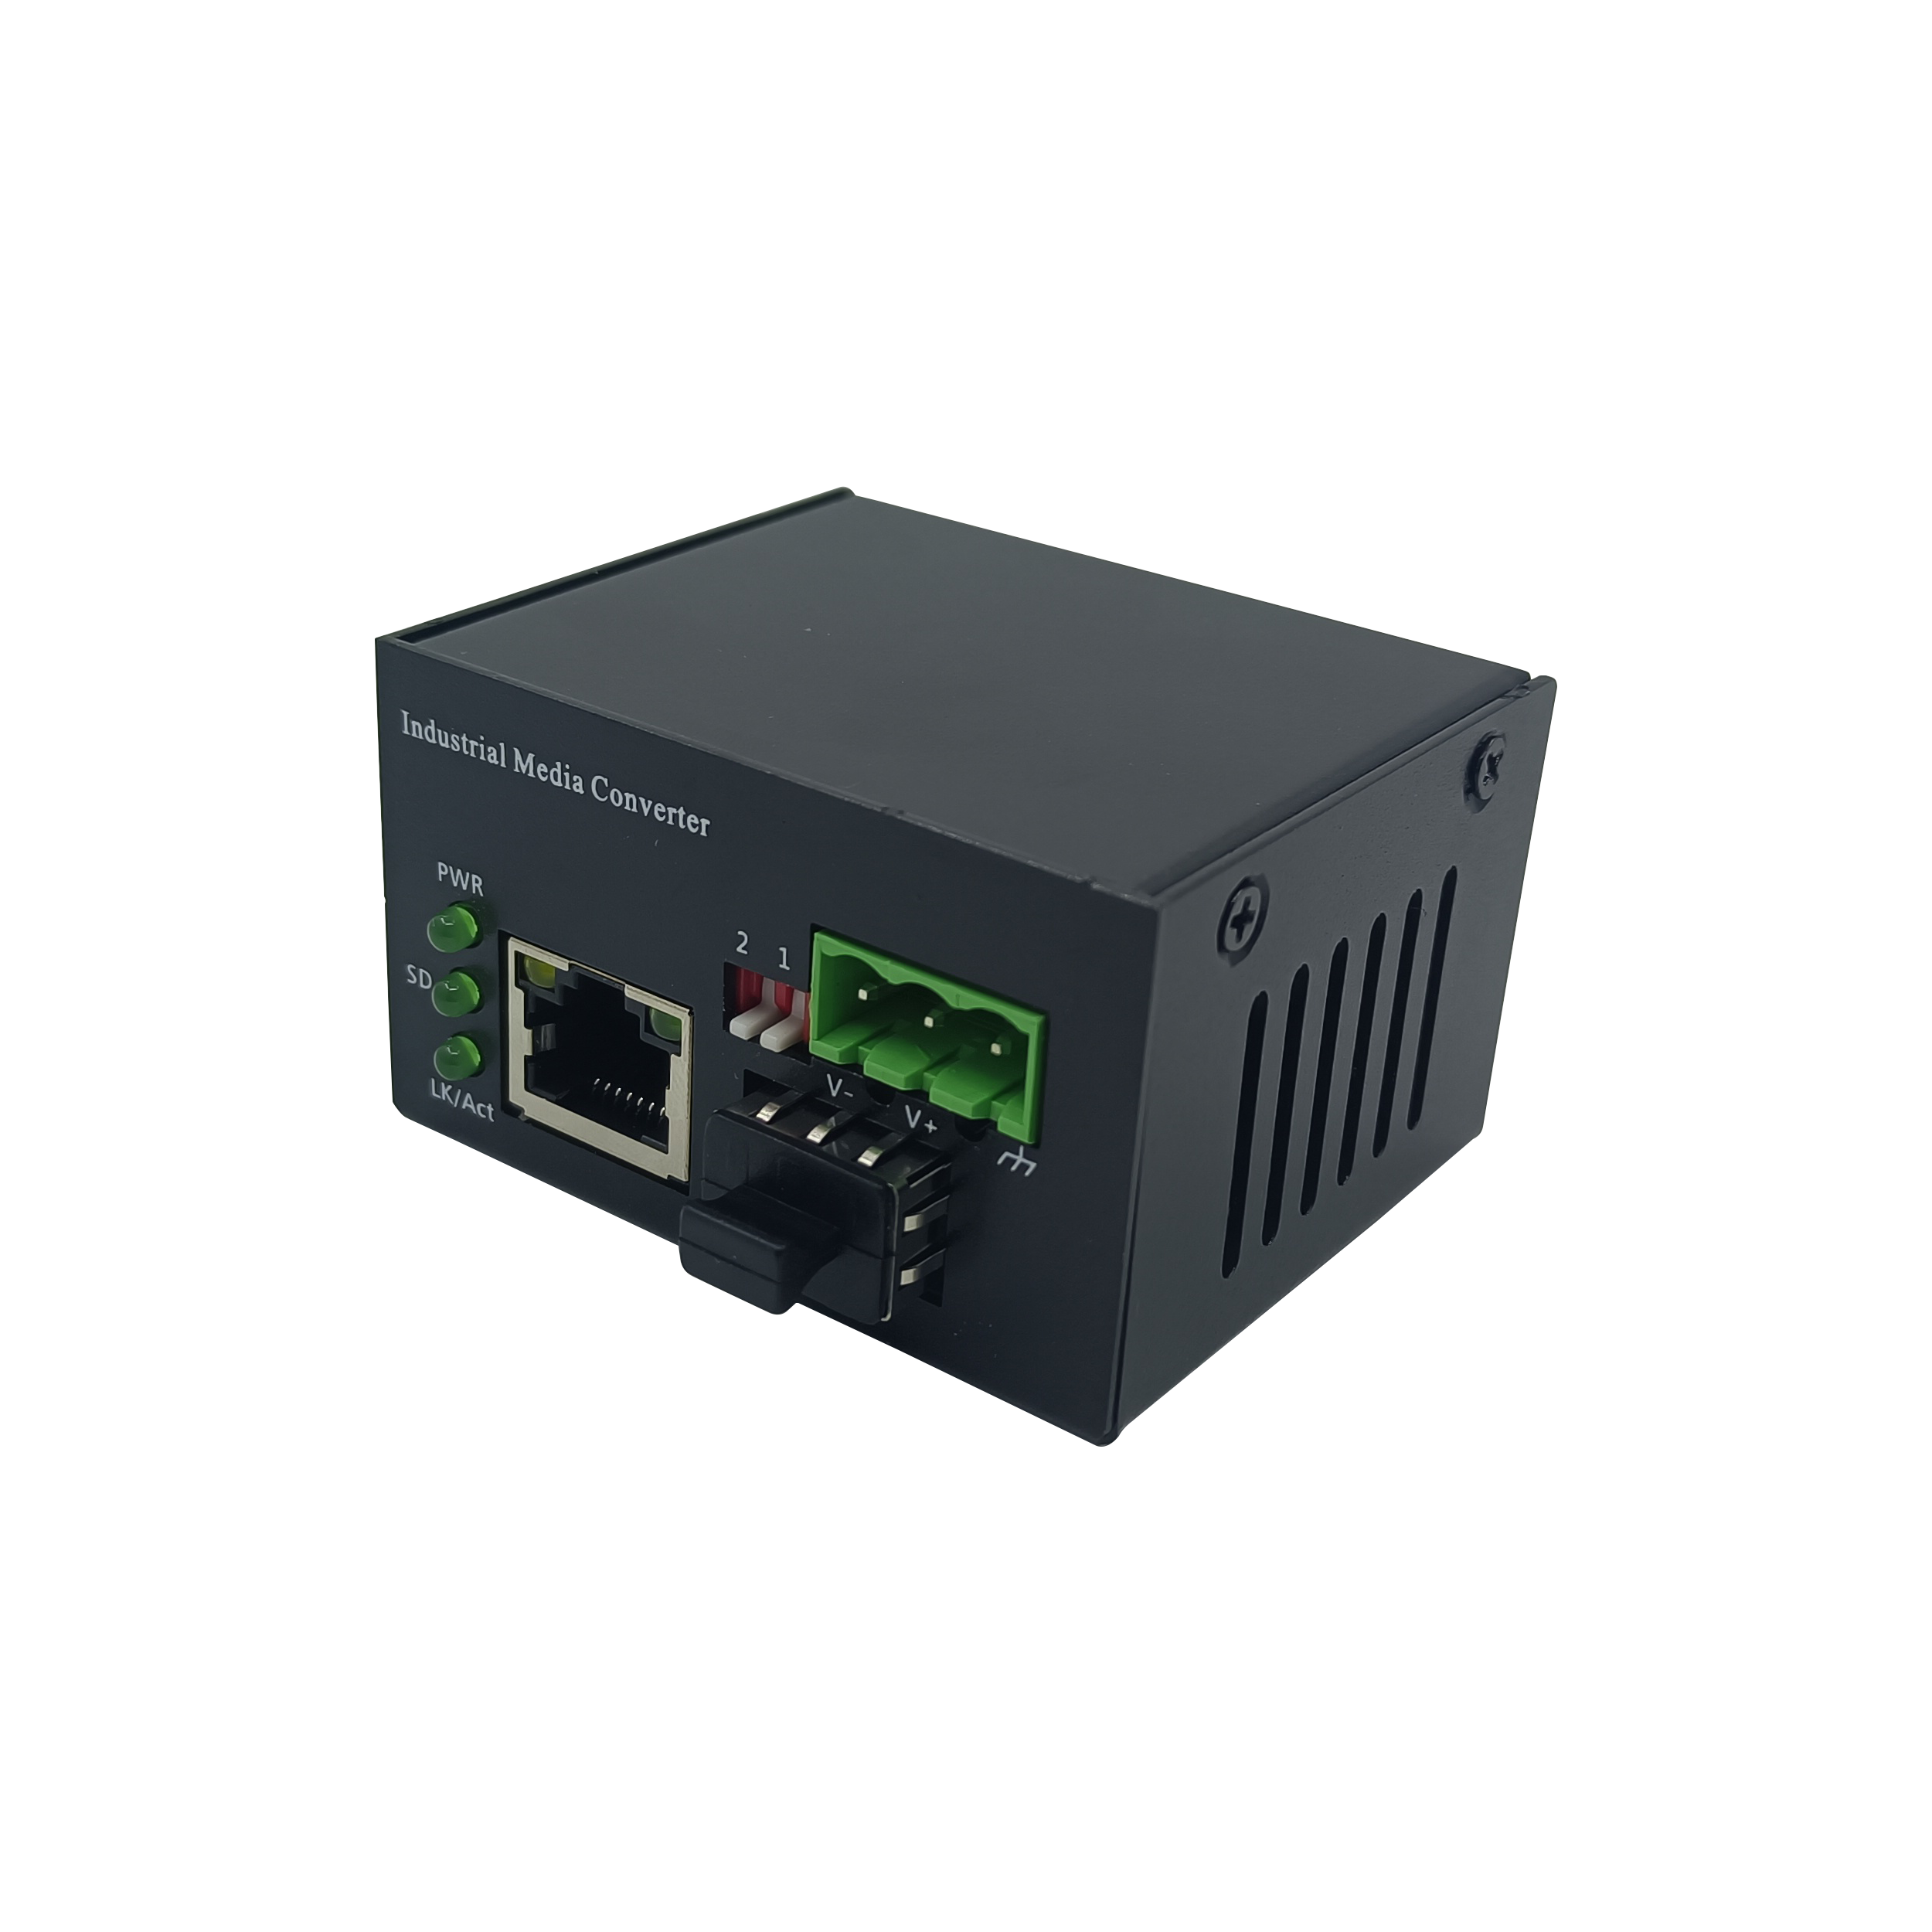 Are you looking for a small size industrial fiber media converter?